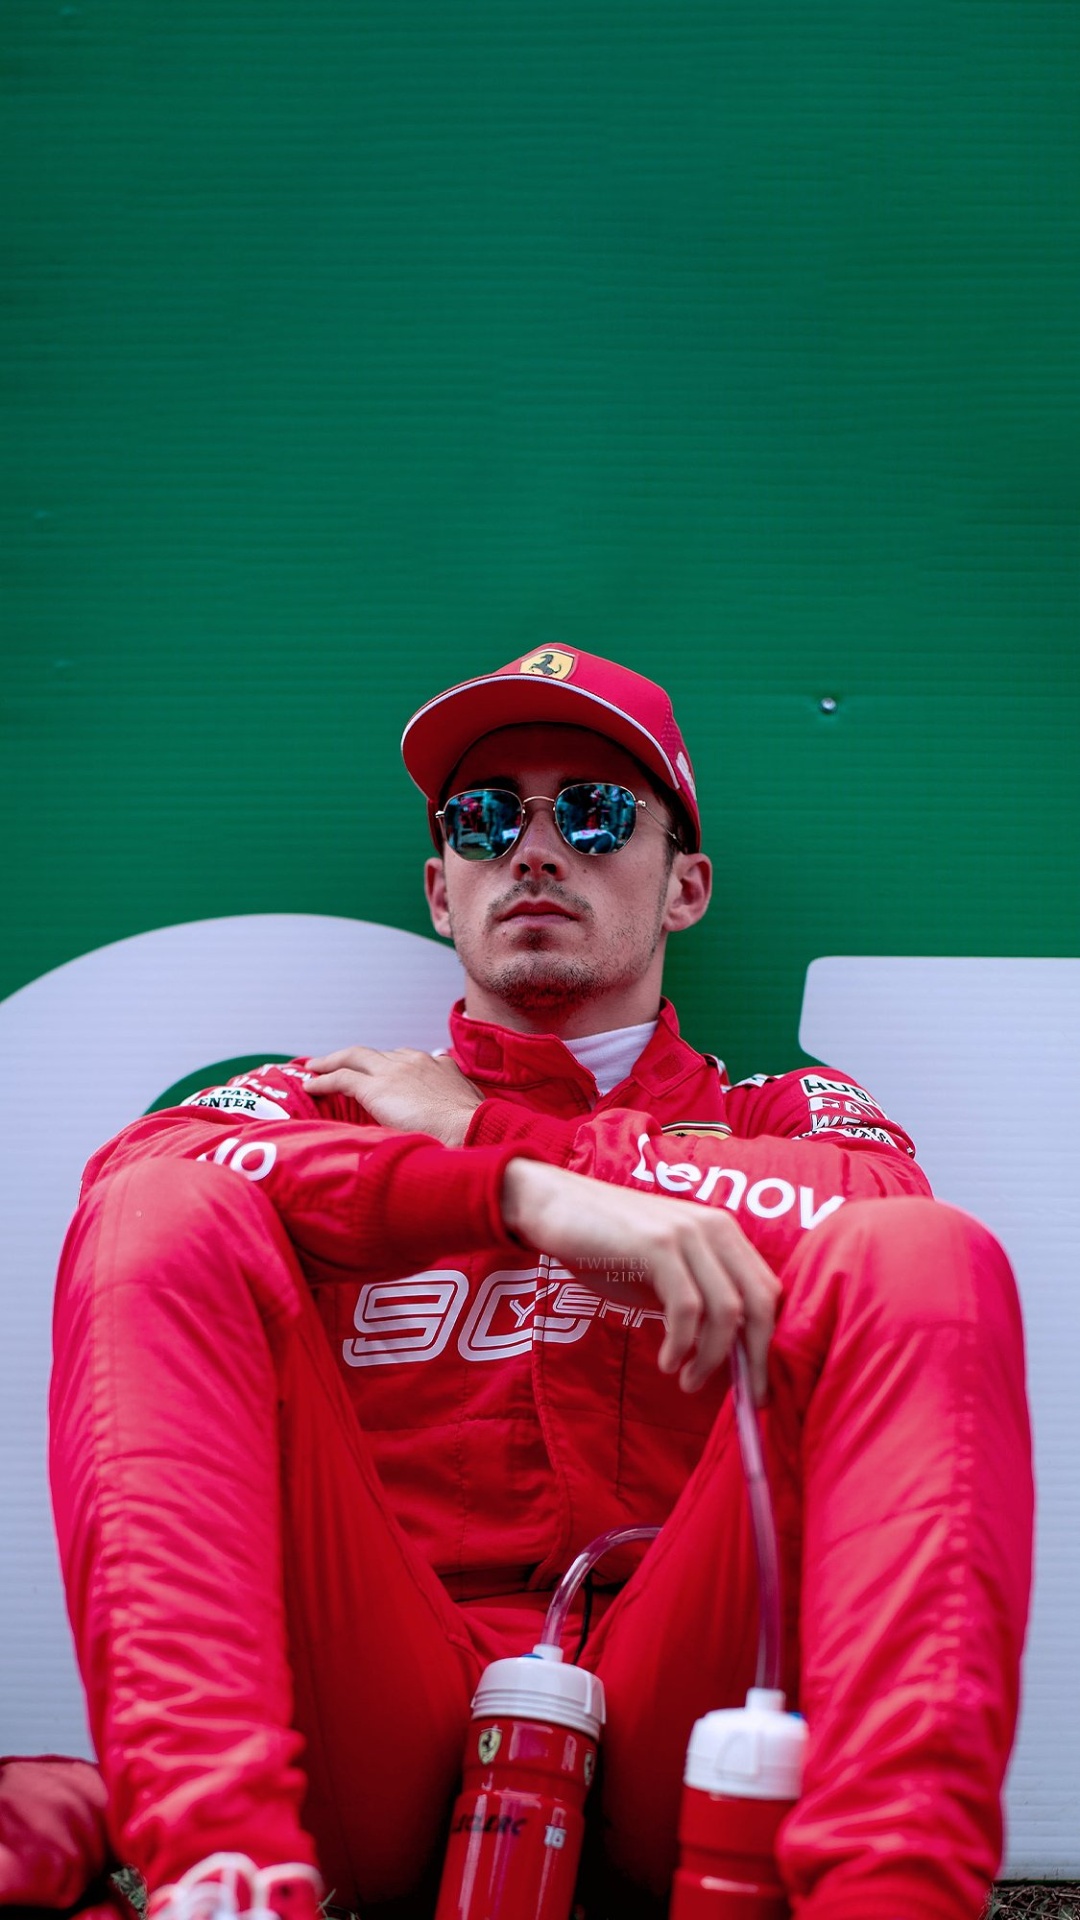 Chinese GP  Charles Leclerc wallpaper in 360x720 resolution